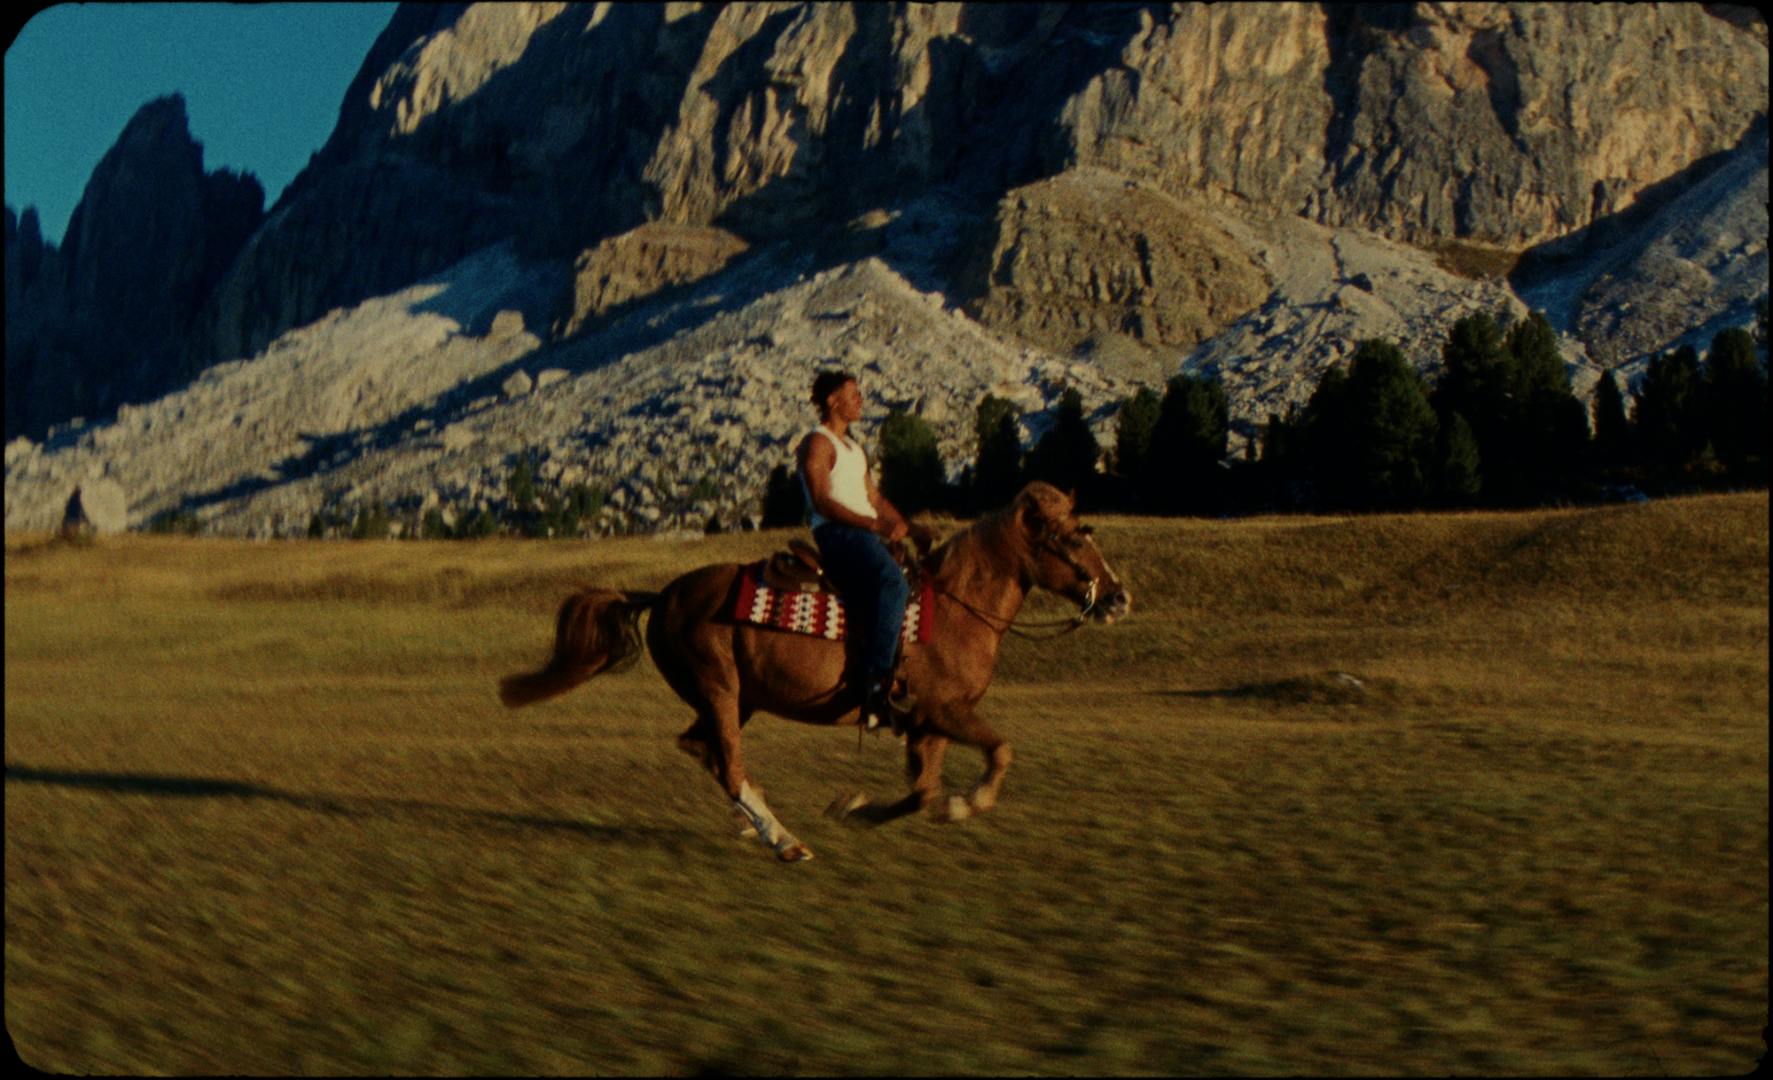 Horse riding, a video shot by Tom Emmerson